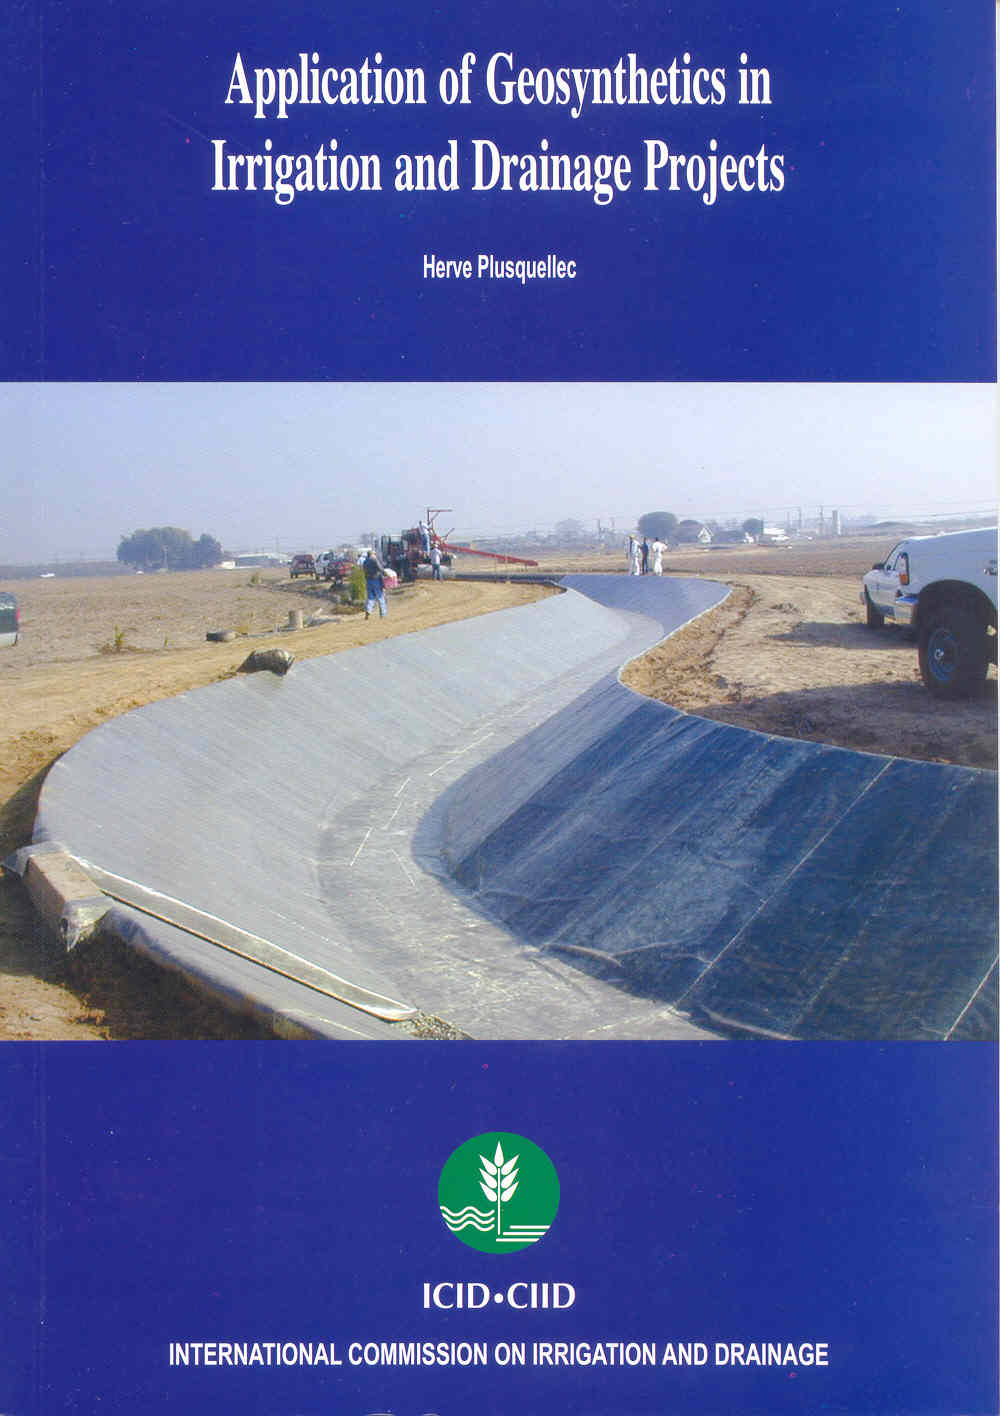 Application of Geosynthetics in Irrigation and Drainage Projects